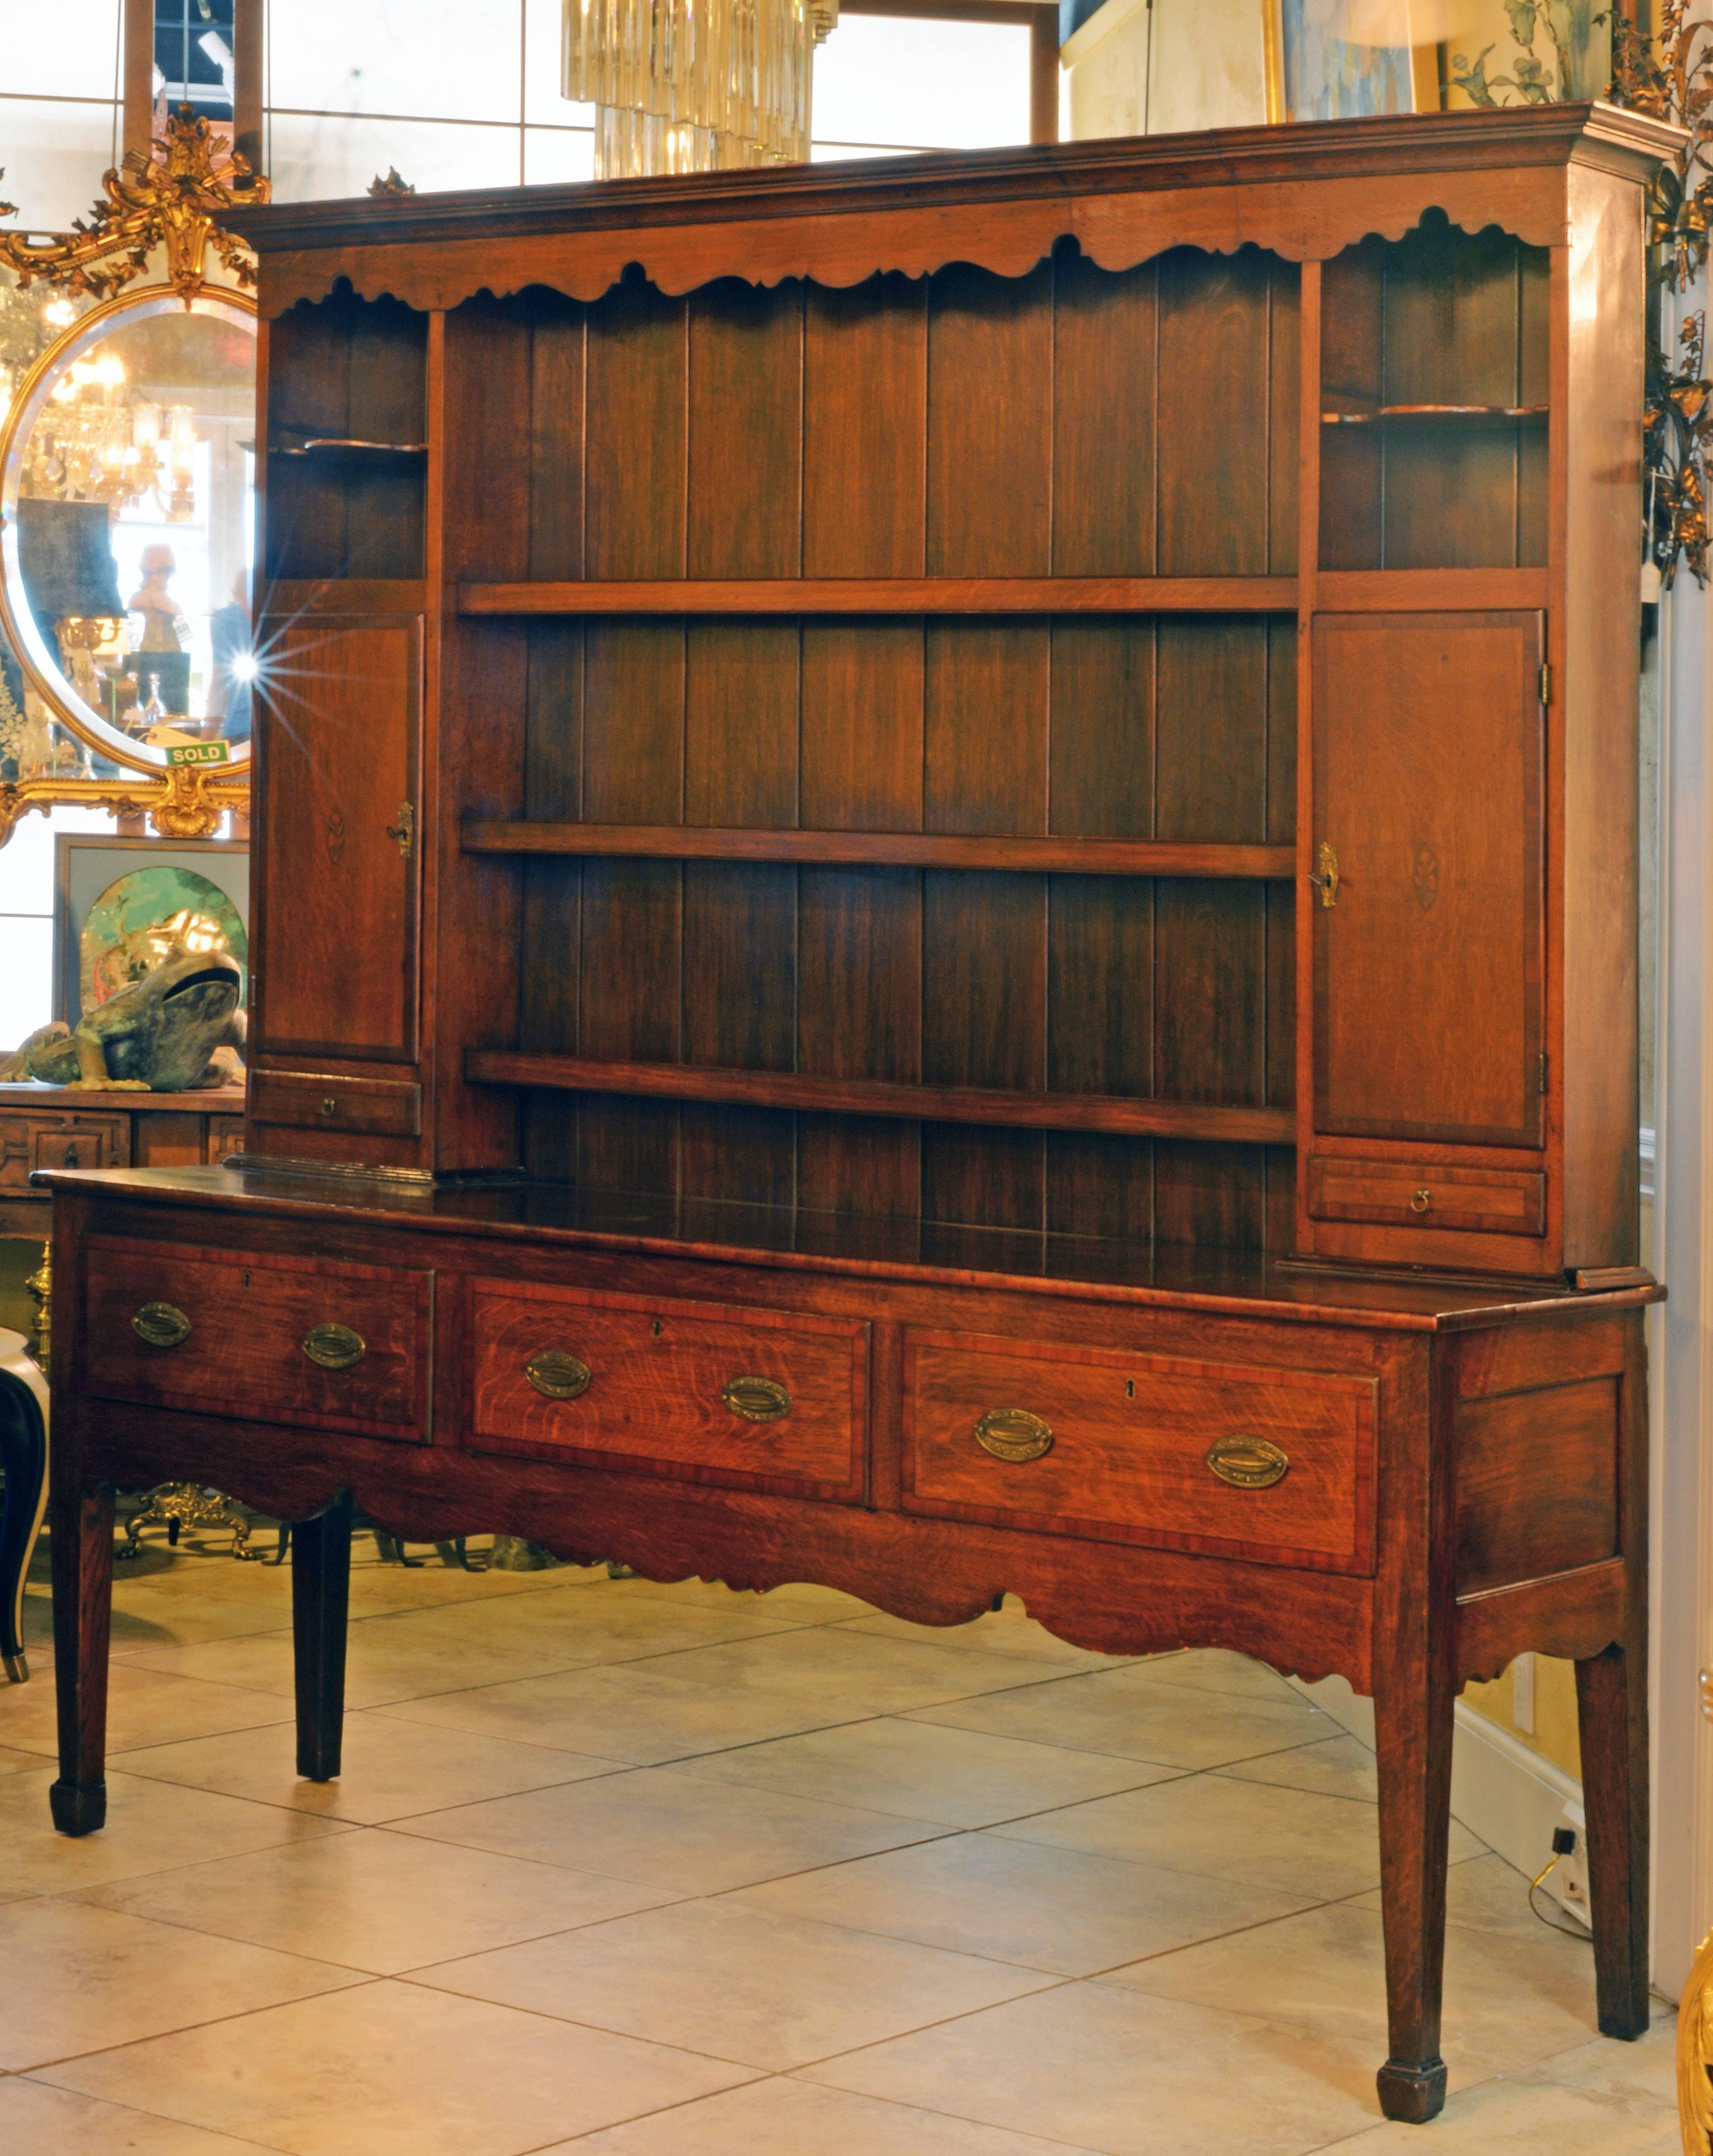 This welsh dresser consists of two parts. The upper part features a moulded corniche and a scalloped frieze above three plate rack shelves flanked by cupboards and small drawers with mahogany banded fronts above which smaller open compartments with